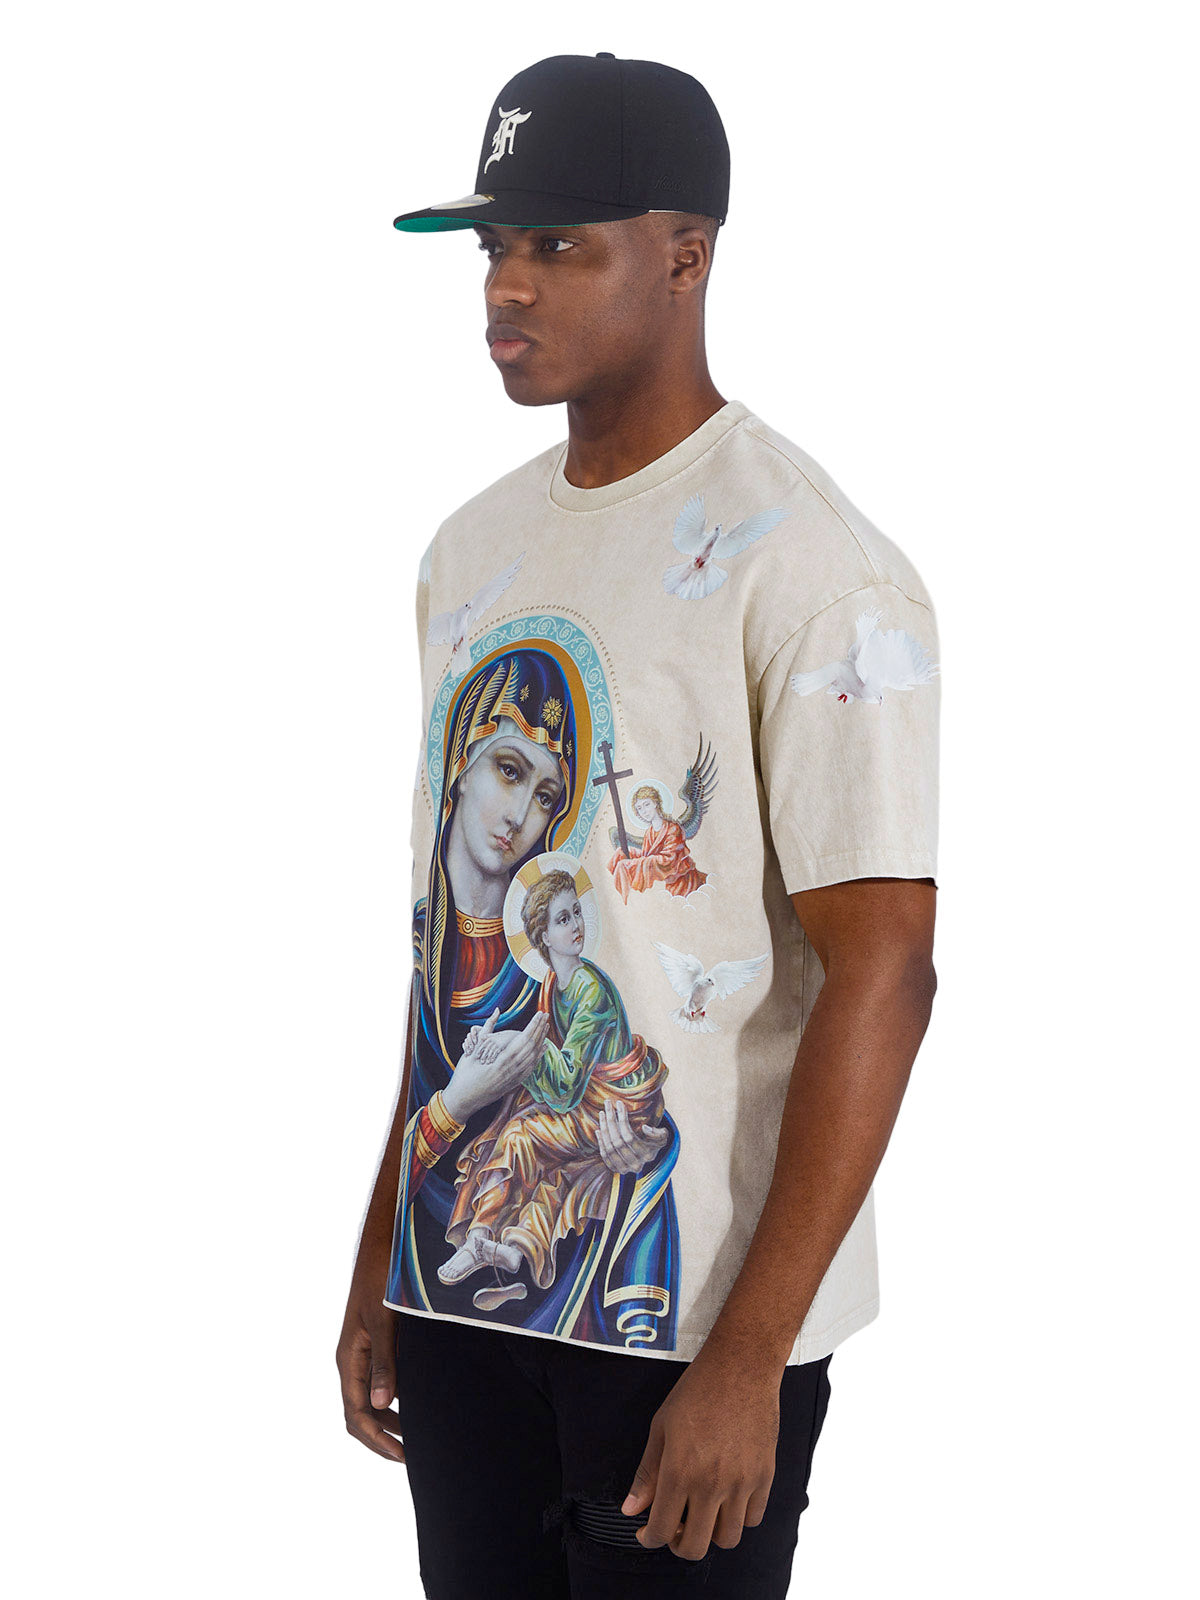 OBSTACLES & DANGERS© Madonna and Child Khaki T-shirt